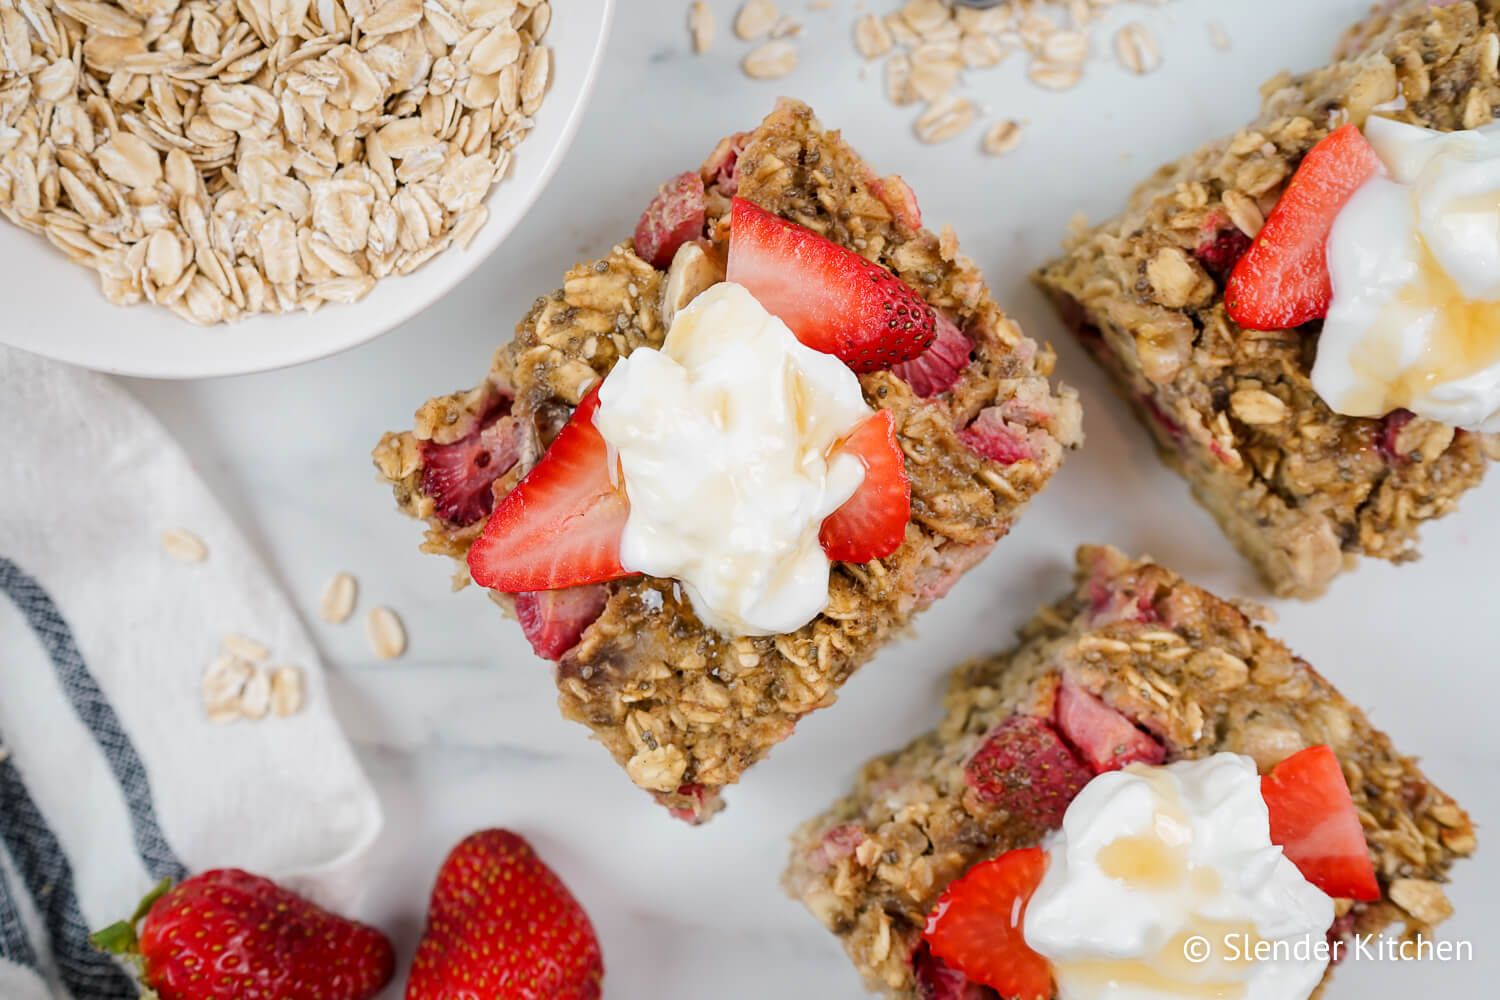 Strawberry banana baked oatmeal with yogurt and strawberries on top.